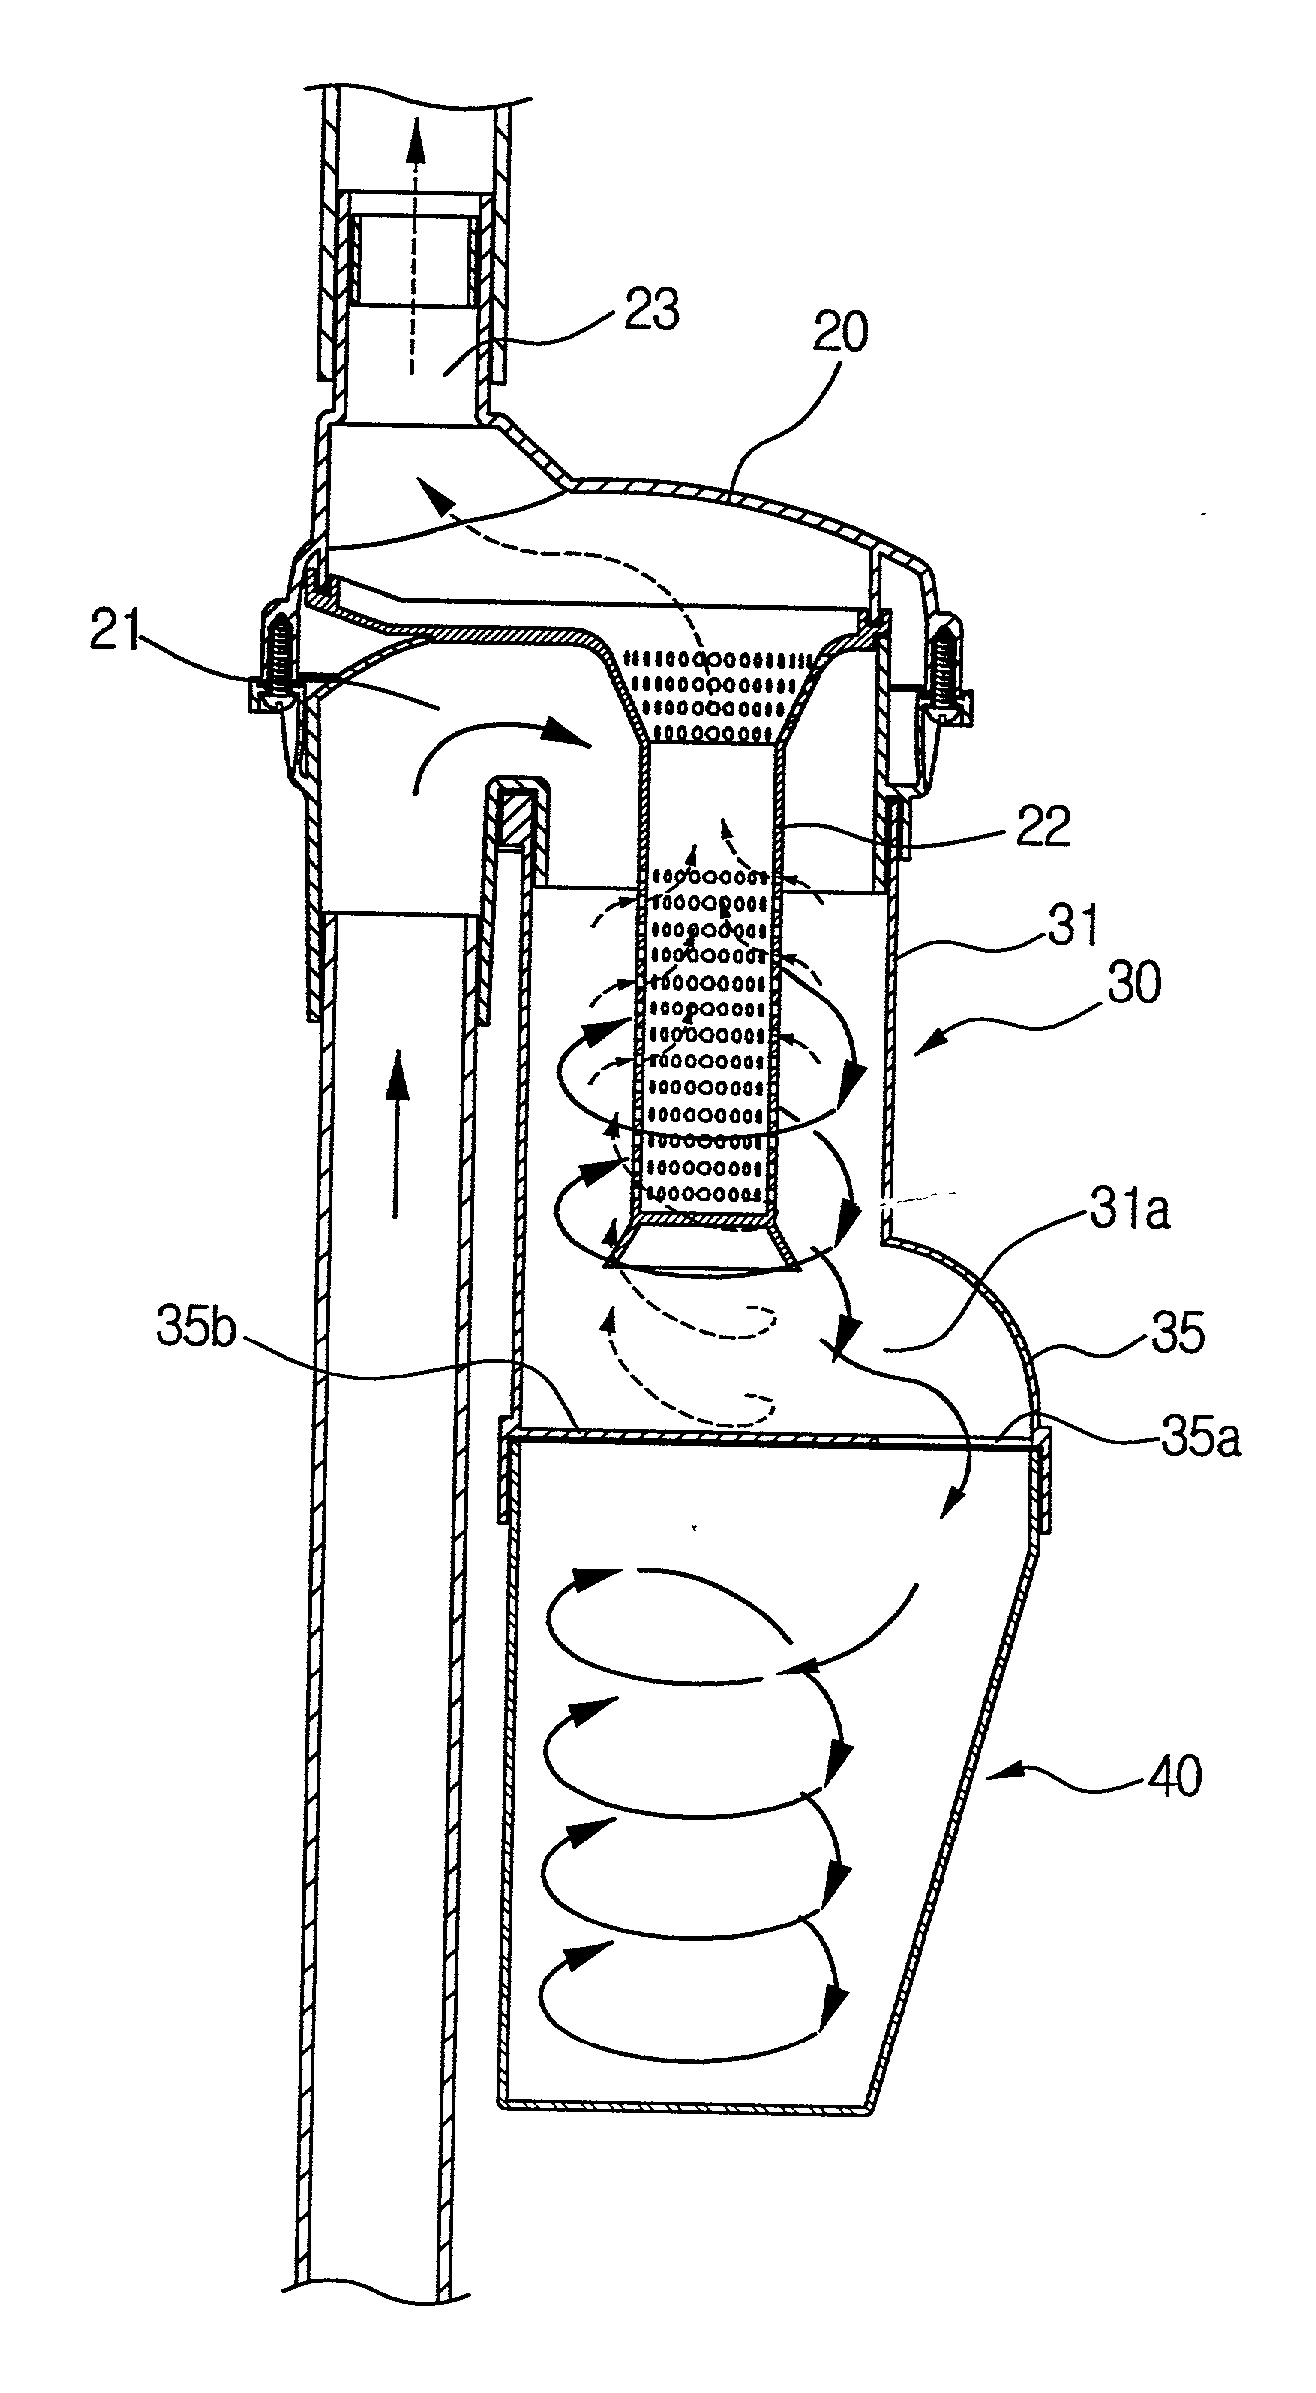 Cyclone dust- collecting apparatus for vacuum cleaner